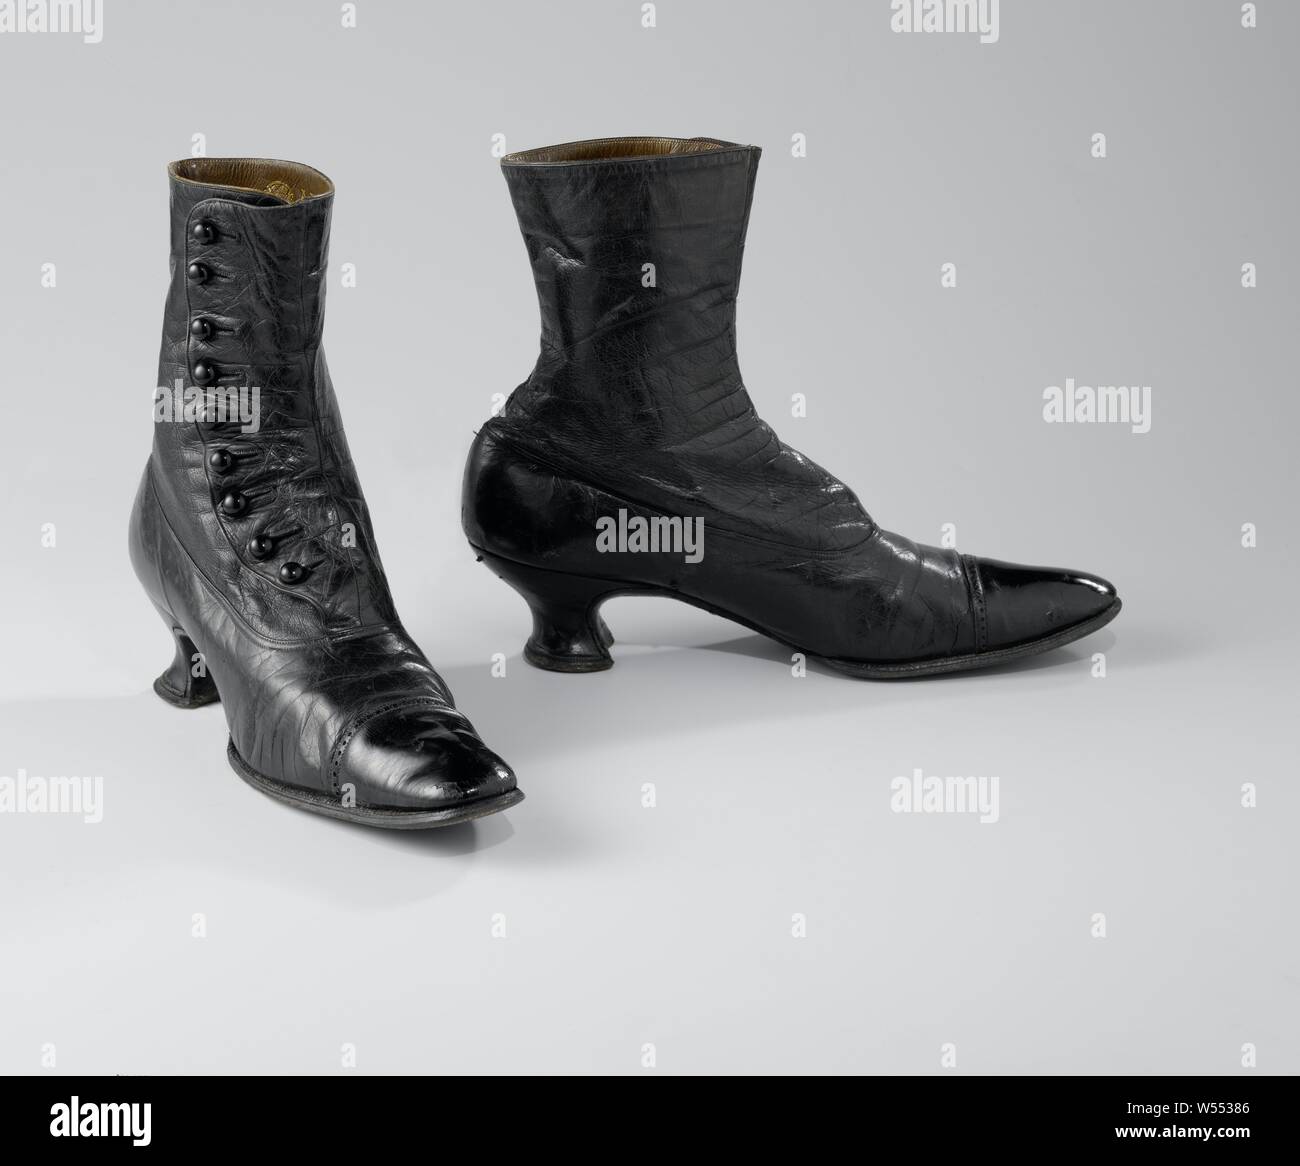 Pair of buttoned boots, Button boot made of black glass leather and lacquer,  Left button boot made of black glass leather and lacquer. Model: Half high  with leather covered Pompadour heel and